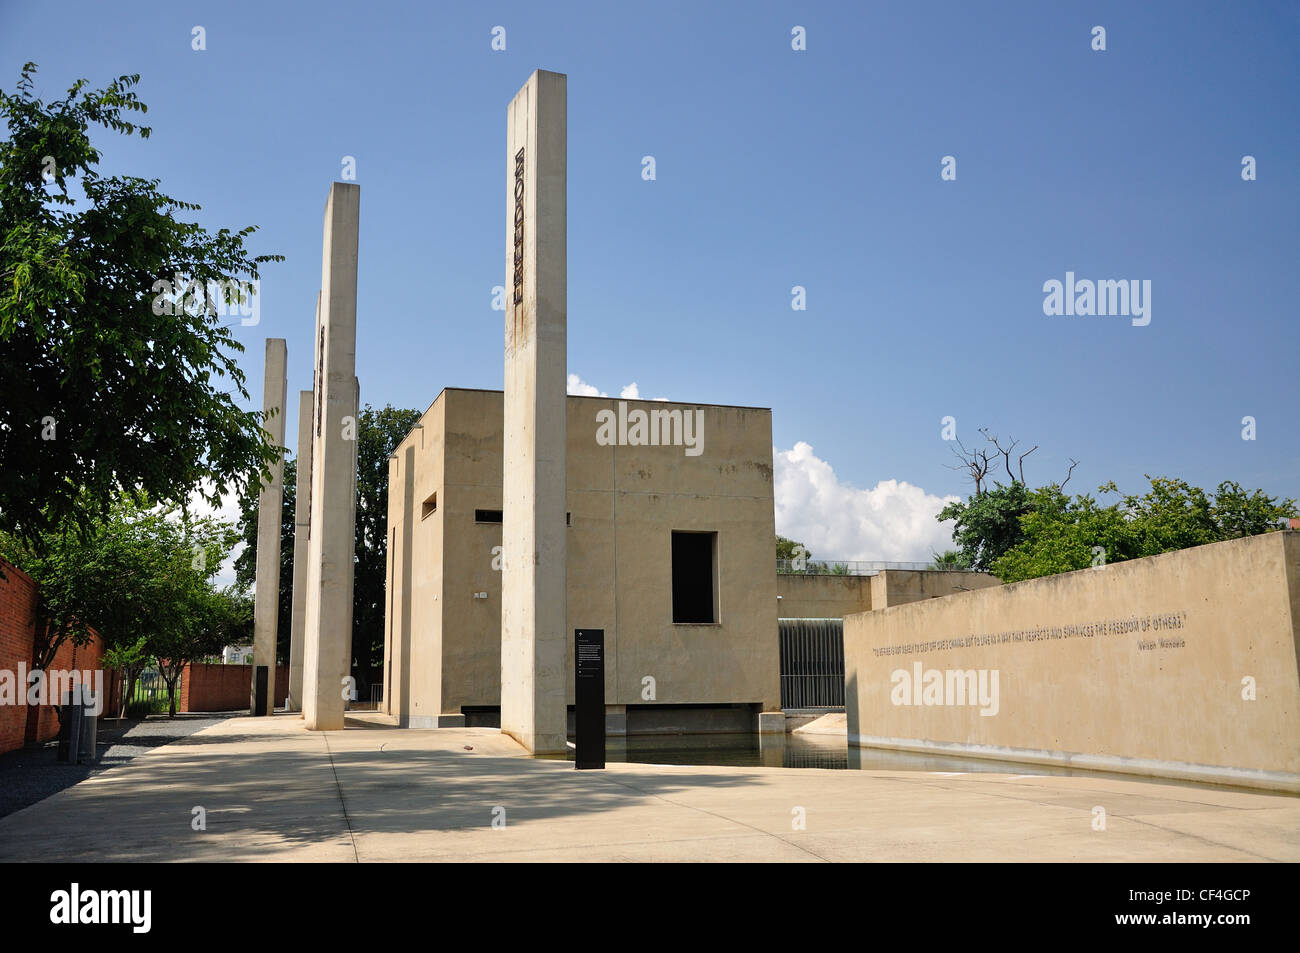 Entrance to The Apartheid Museum, Johannesburg, Gauteng Province, Republic of South Africa Stock Photo